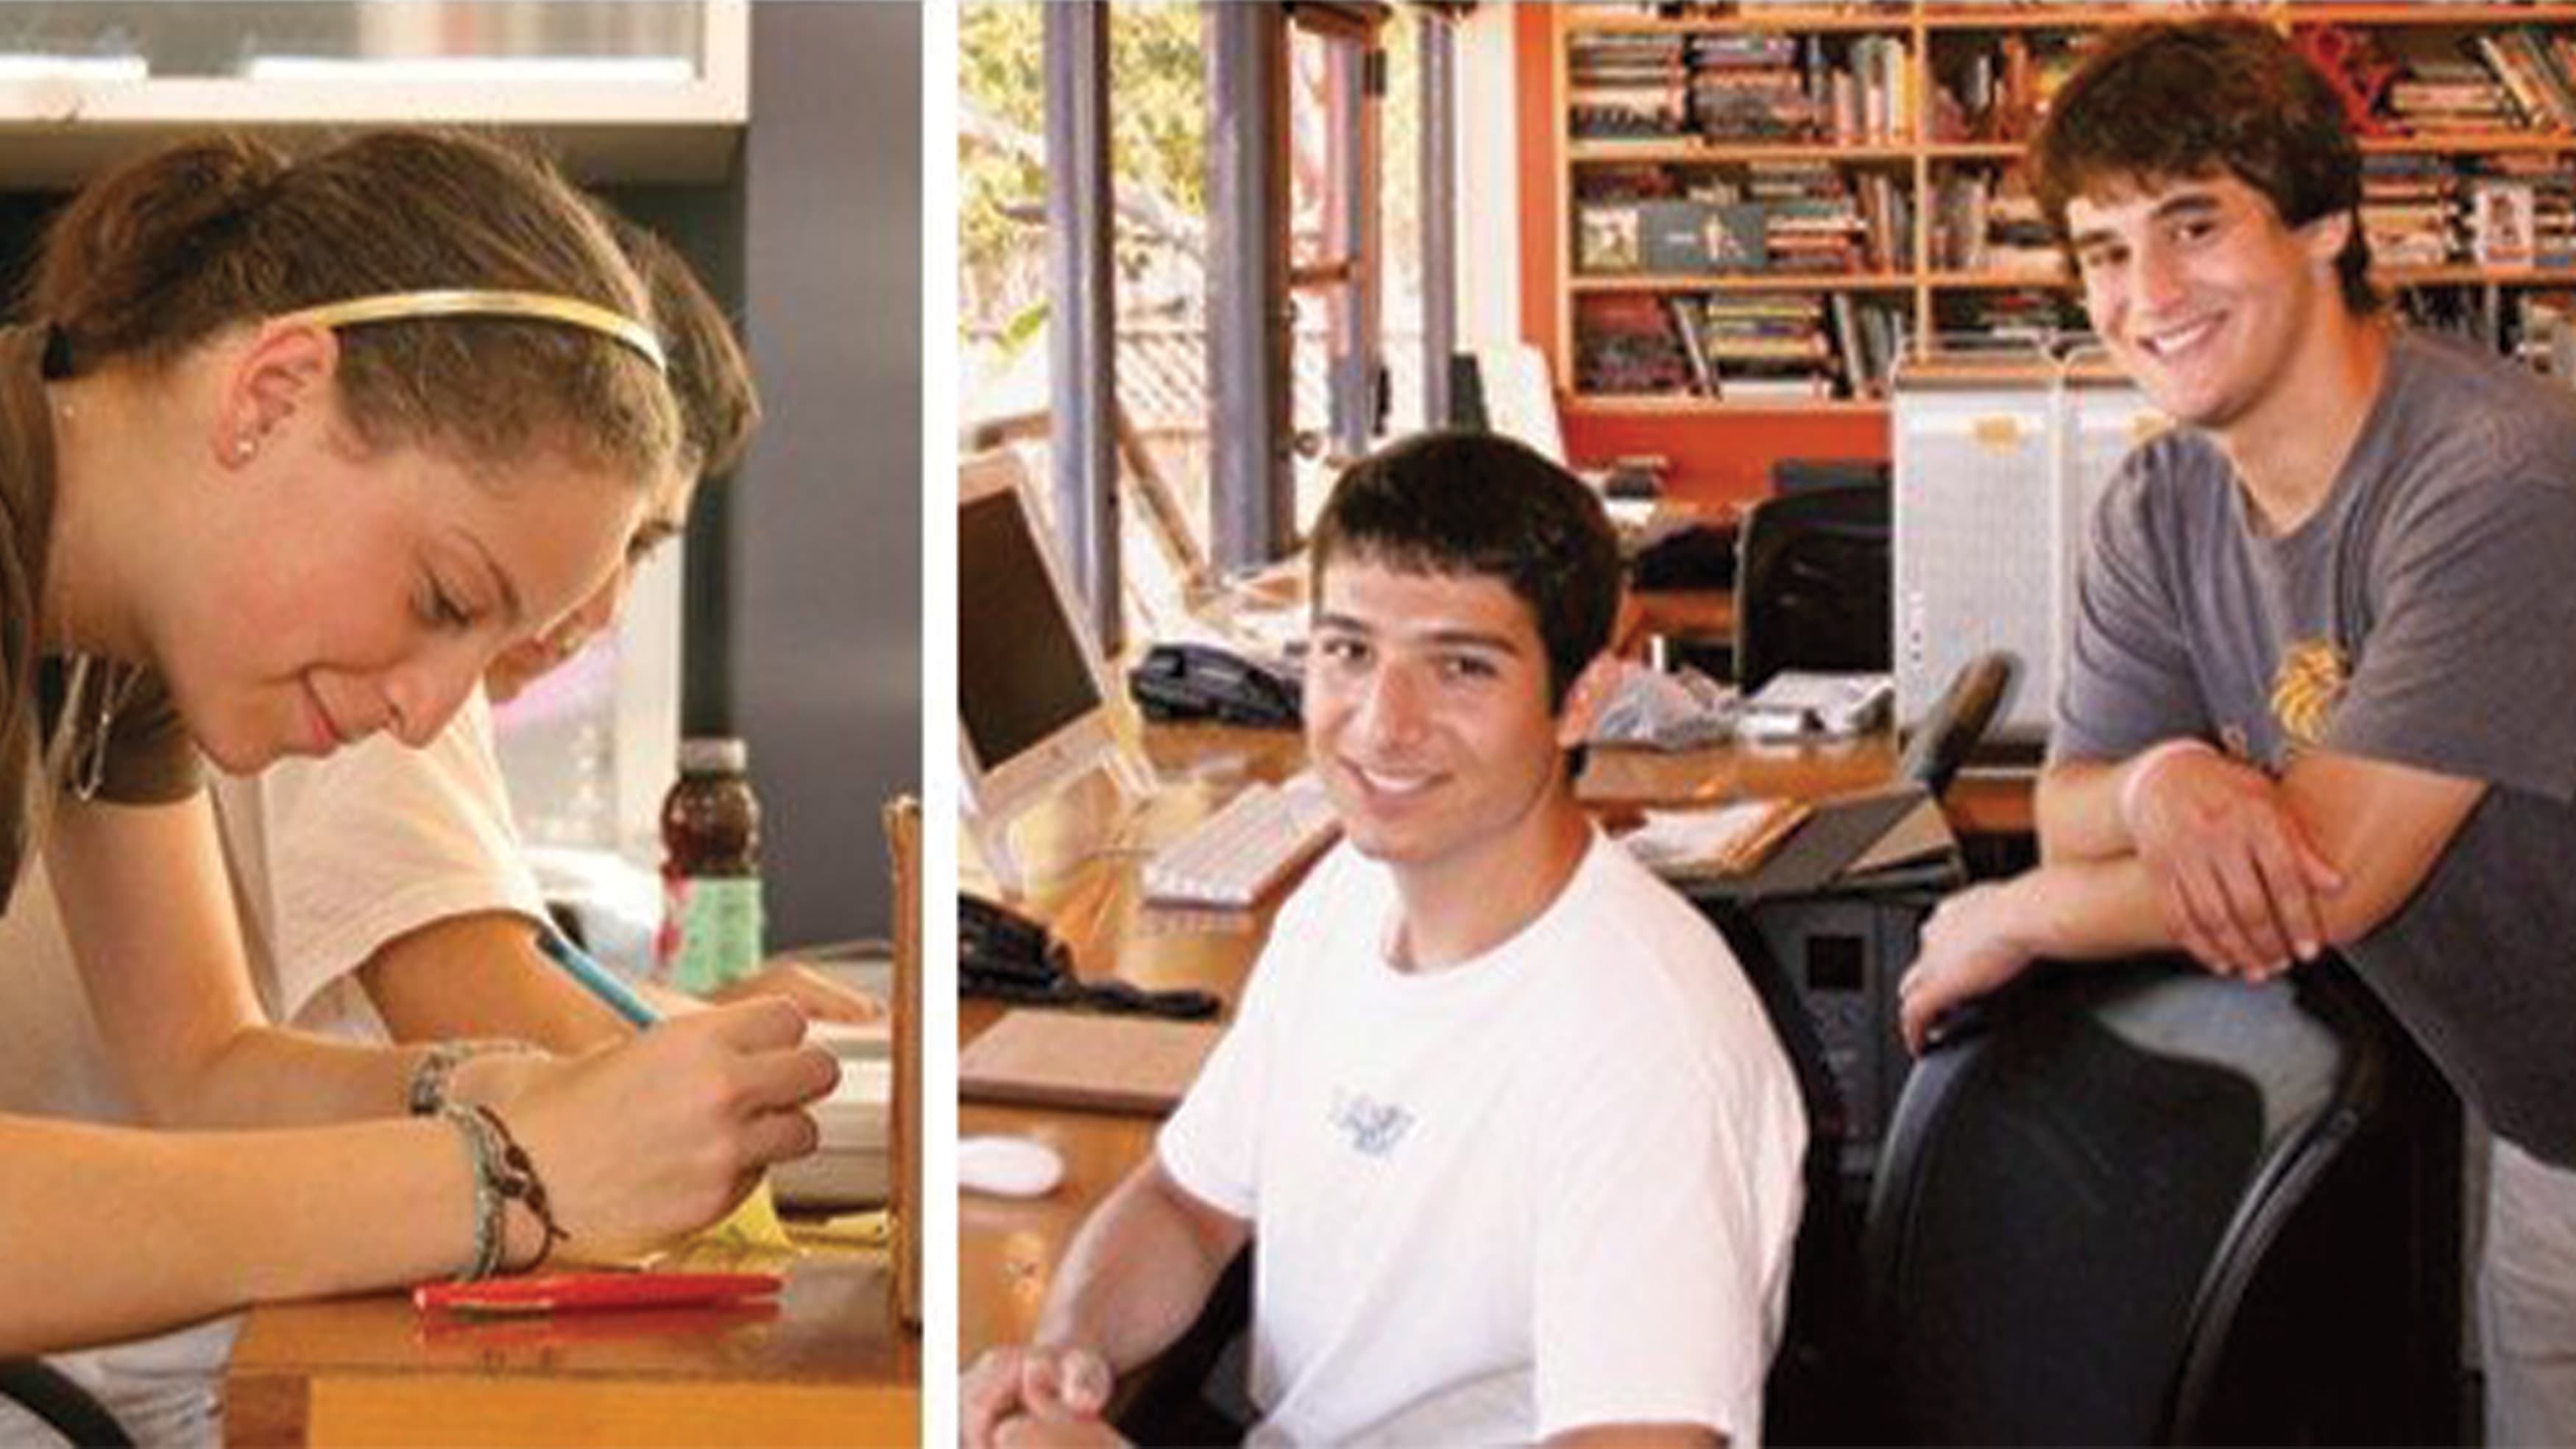 RSM Design welcomes three new interns to the San Clemente office